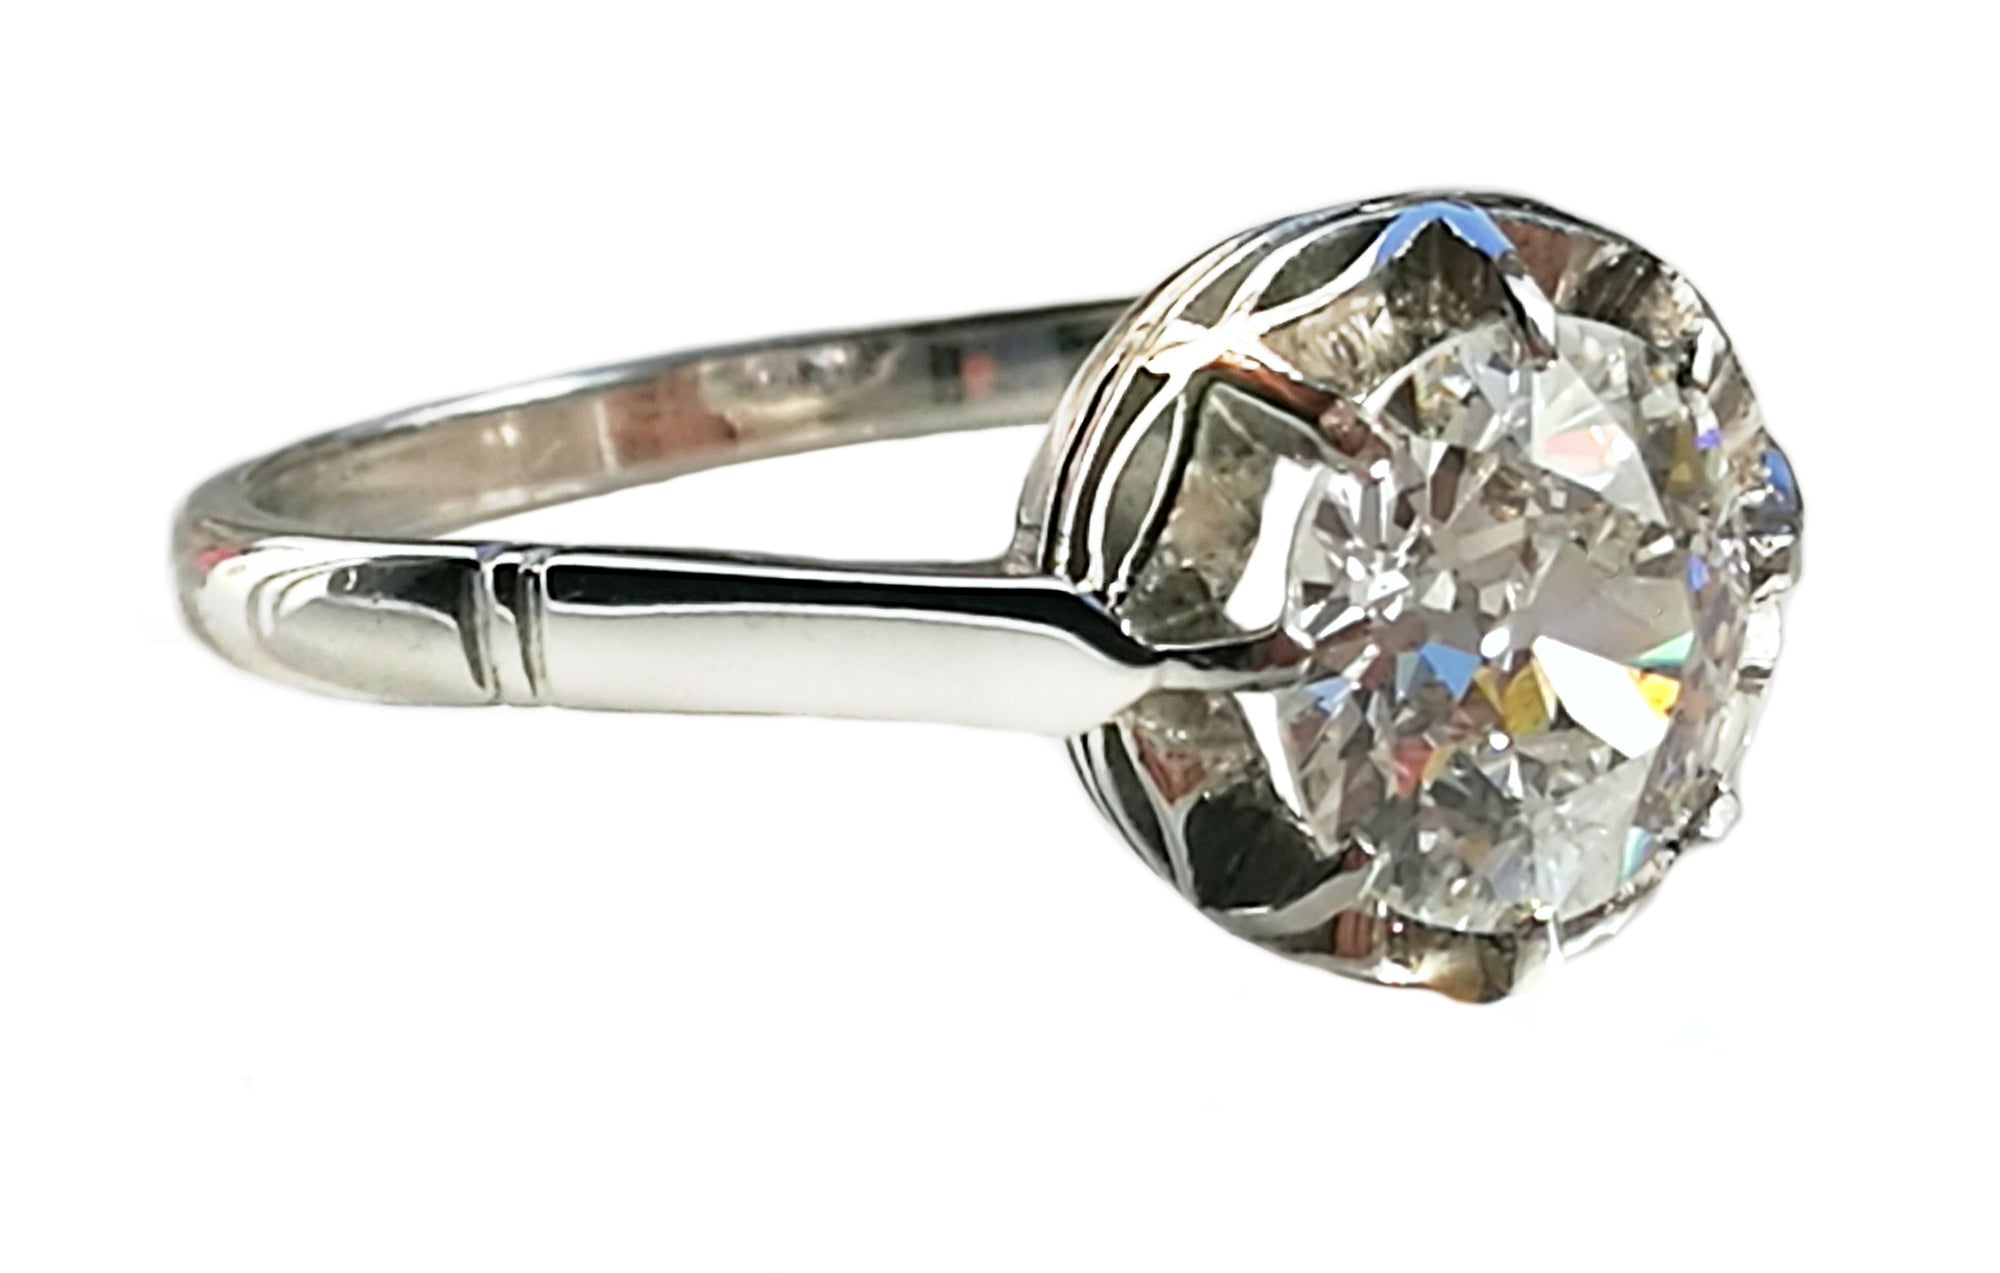 Antique Handmade French 1.50ct Old Cut Diamond Buttercup Engagement Ring in Platinum